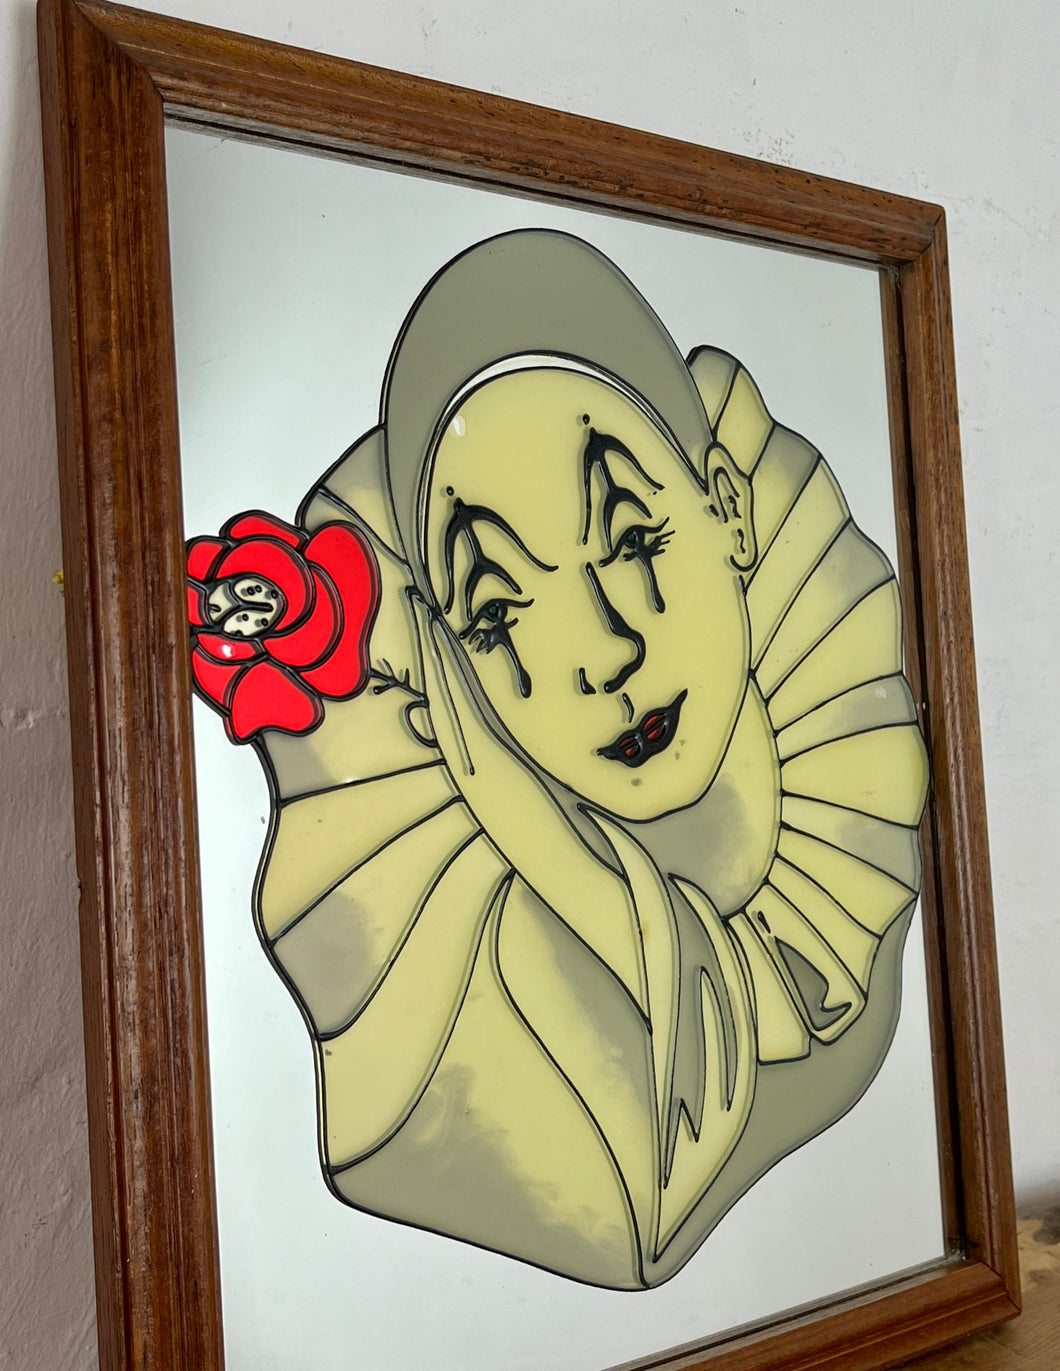 Excellent vintage Pierrot decorative mirror showing a stunning design in various panels in cream and grey with a vivid red rose in an out finish; the face had magnificent intricate detail with a thoughtful finish with a hint of red in the lips.